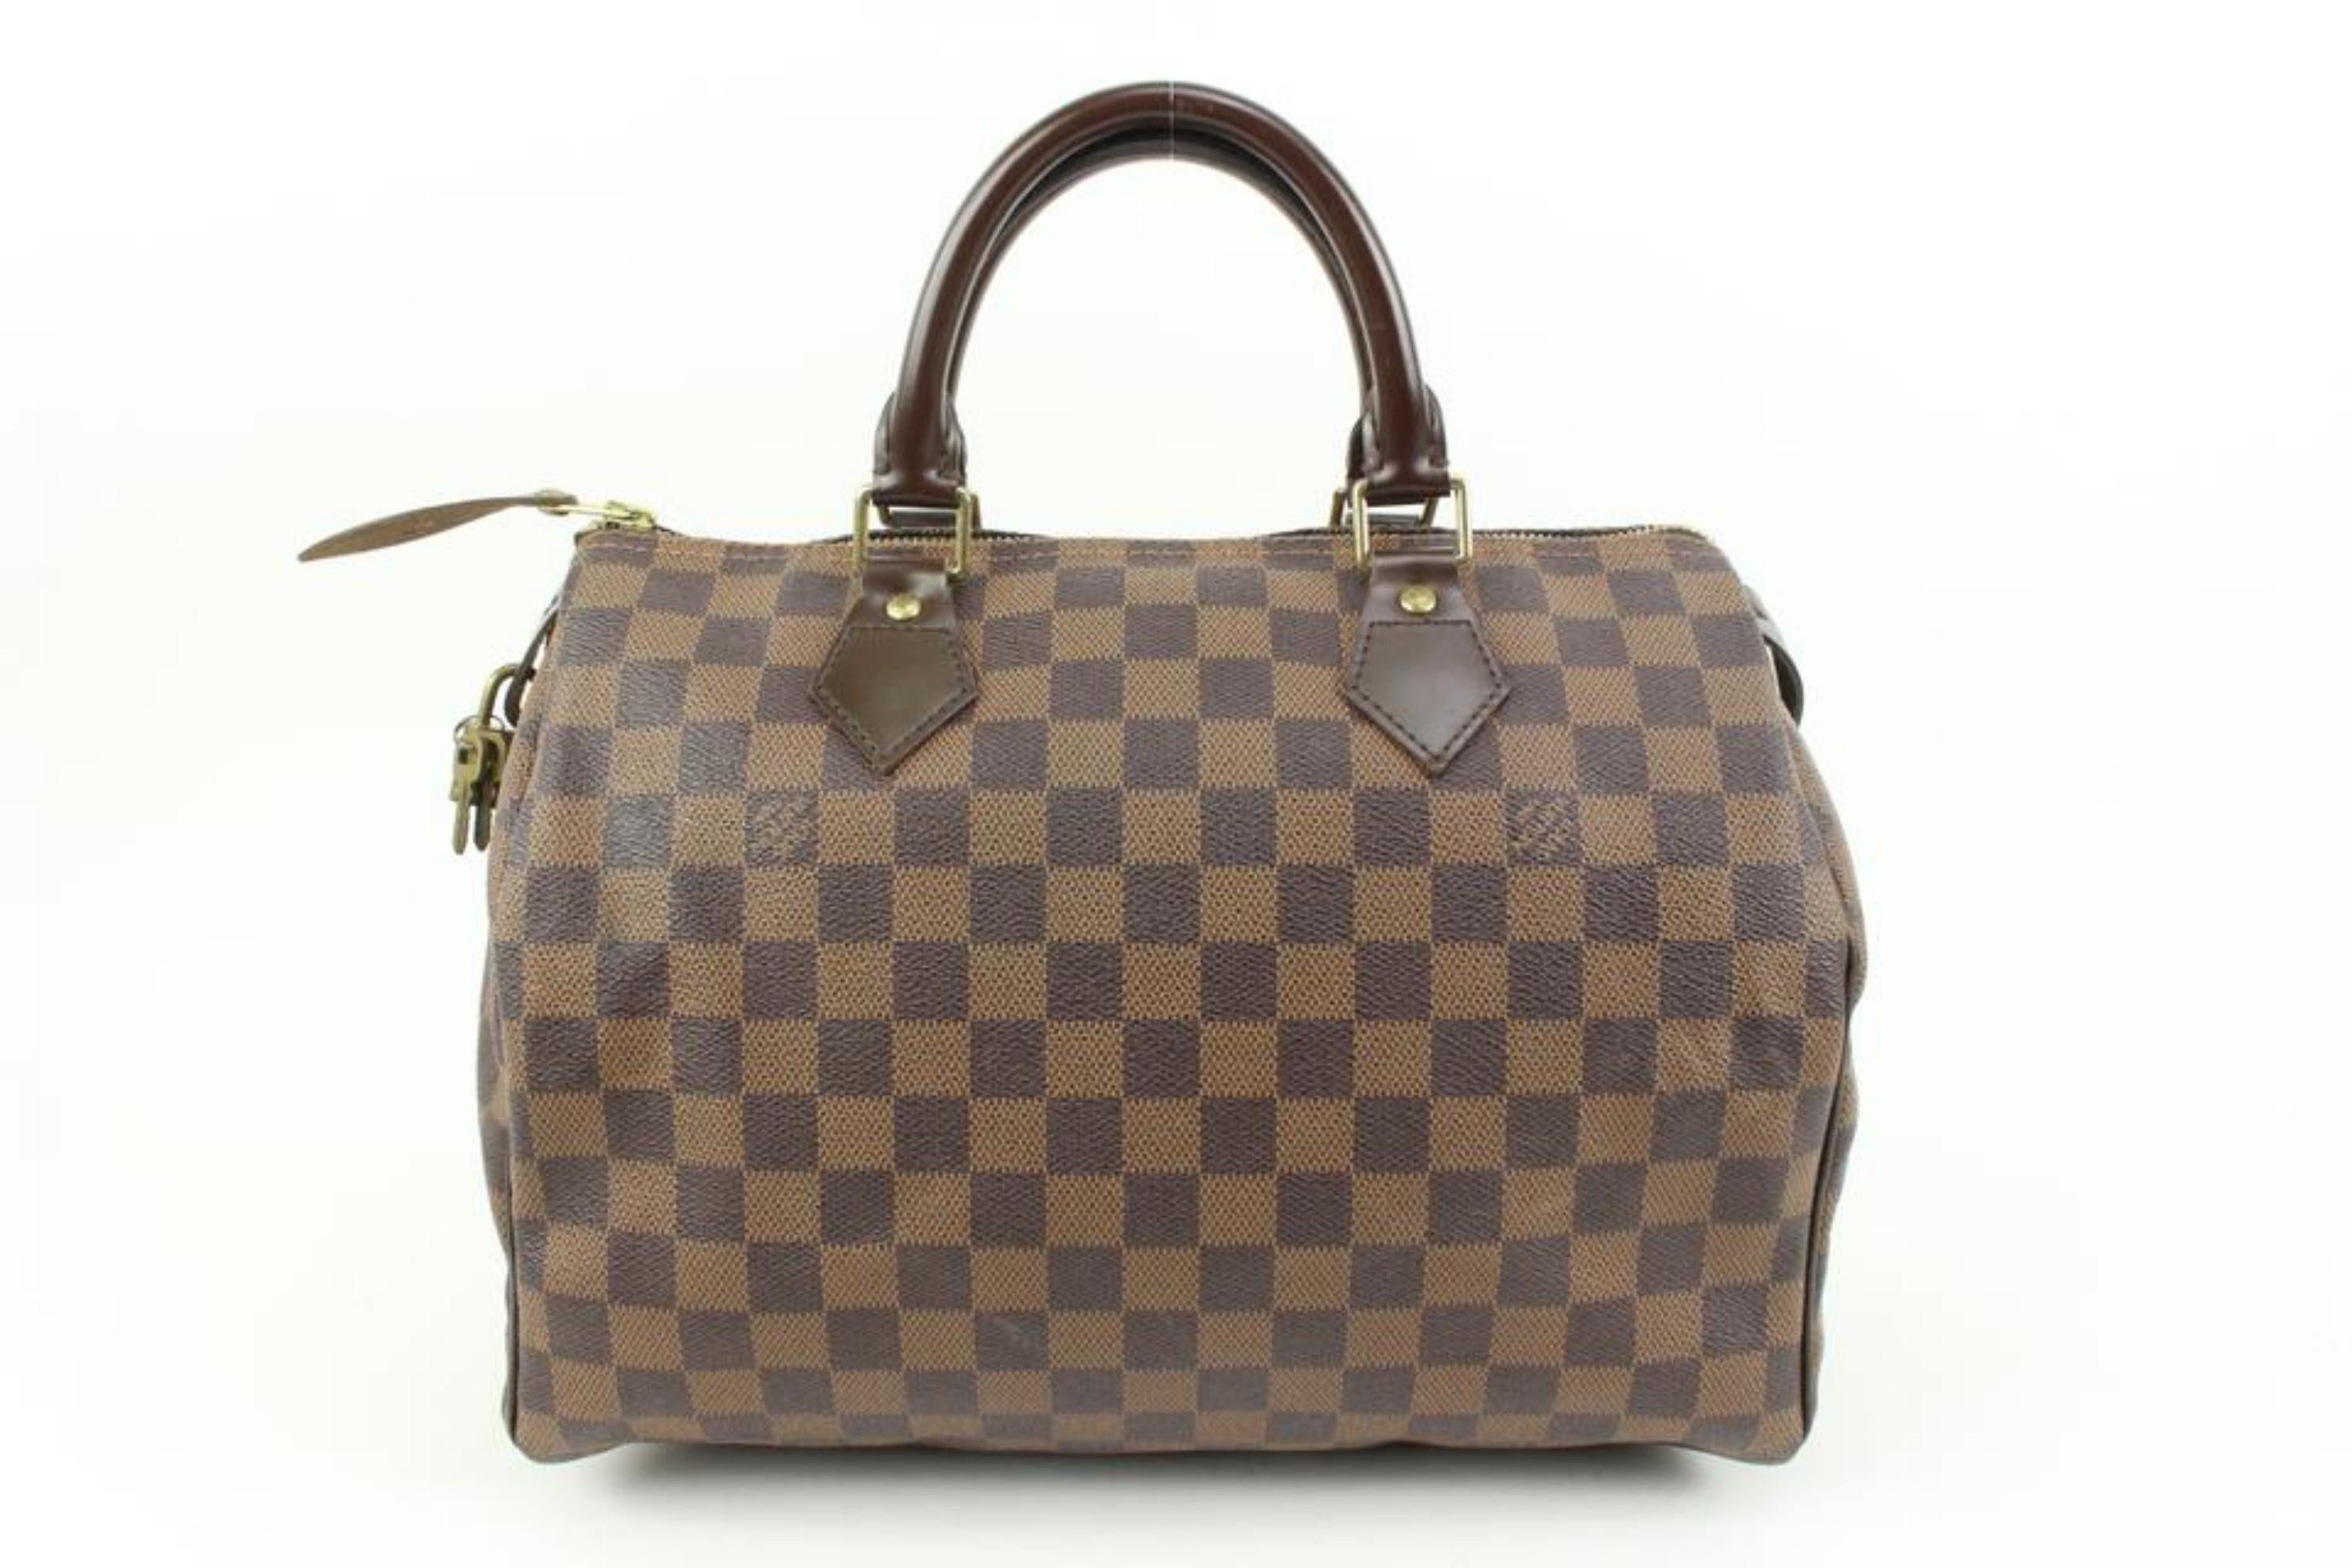 Louis Vuitton Damier Ebene Speedy 30 Boston Bag MM 58lk325s In Good Condition For Sale In Dix hills, NY